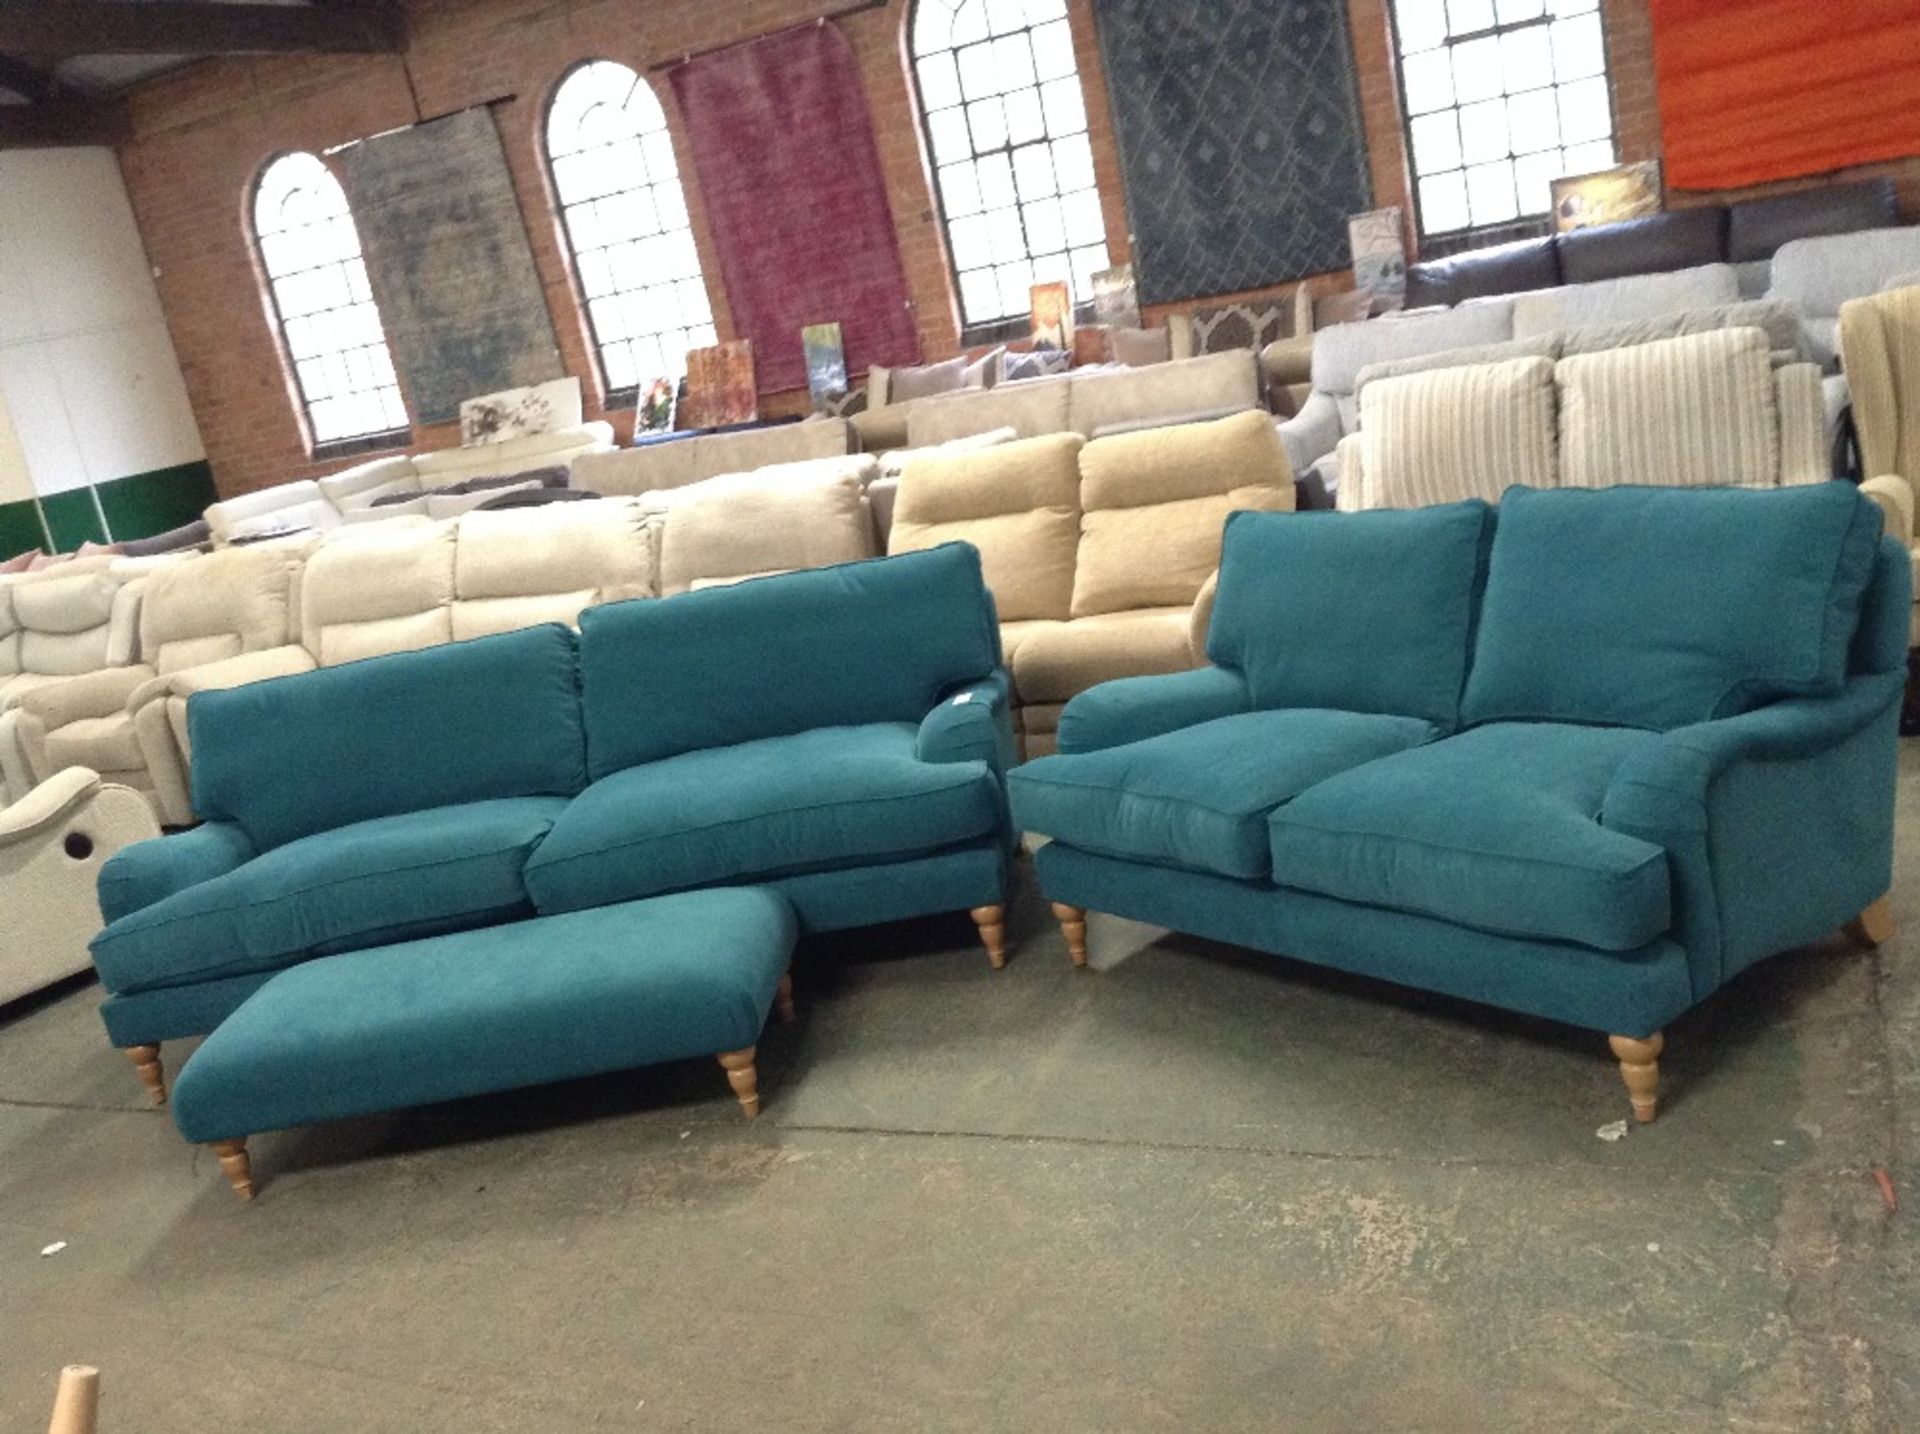 TEAL LARGE 3 SEATER SOFA 2 SEATER SOFA AND FOOTSTO